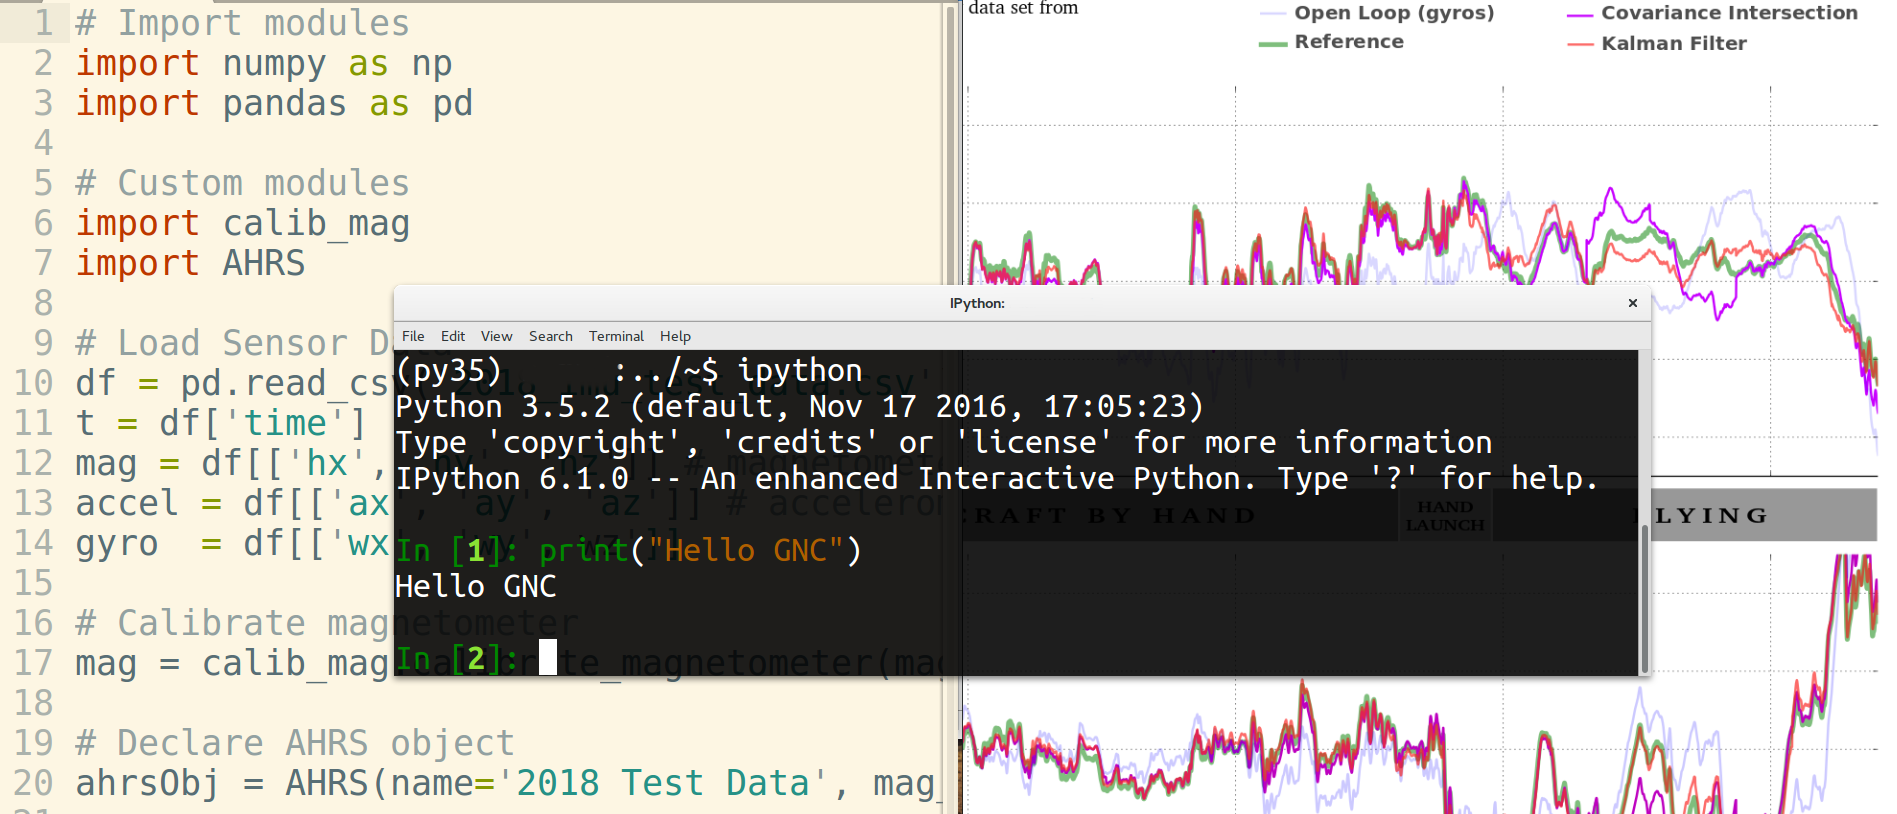 Getting Started: GNC Analysis with Python